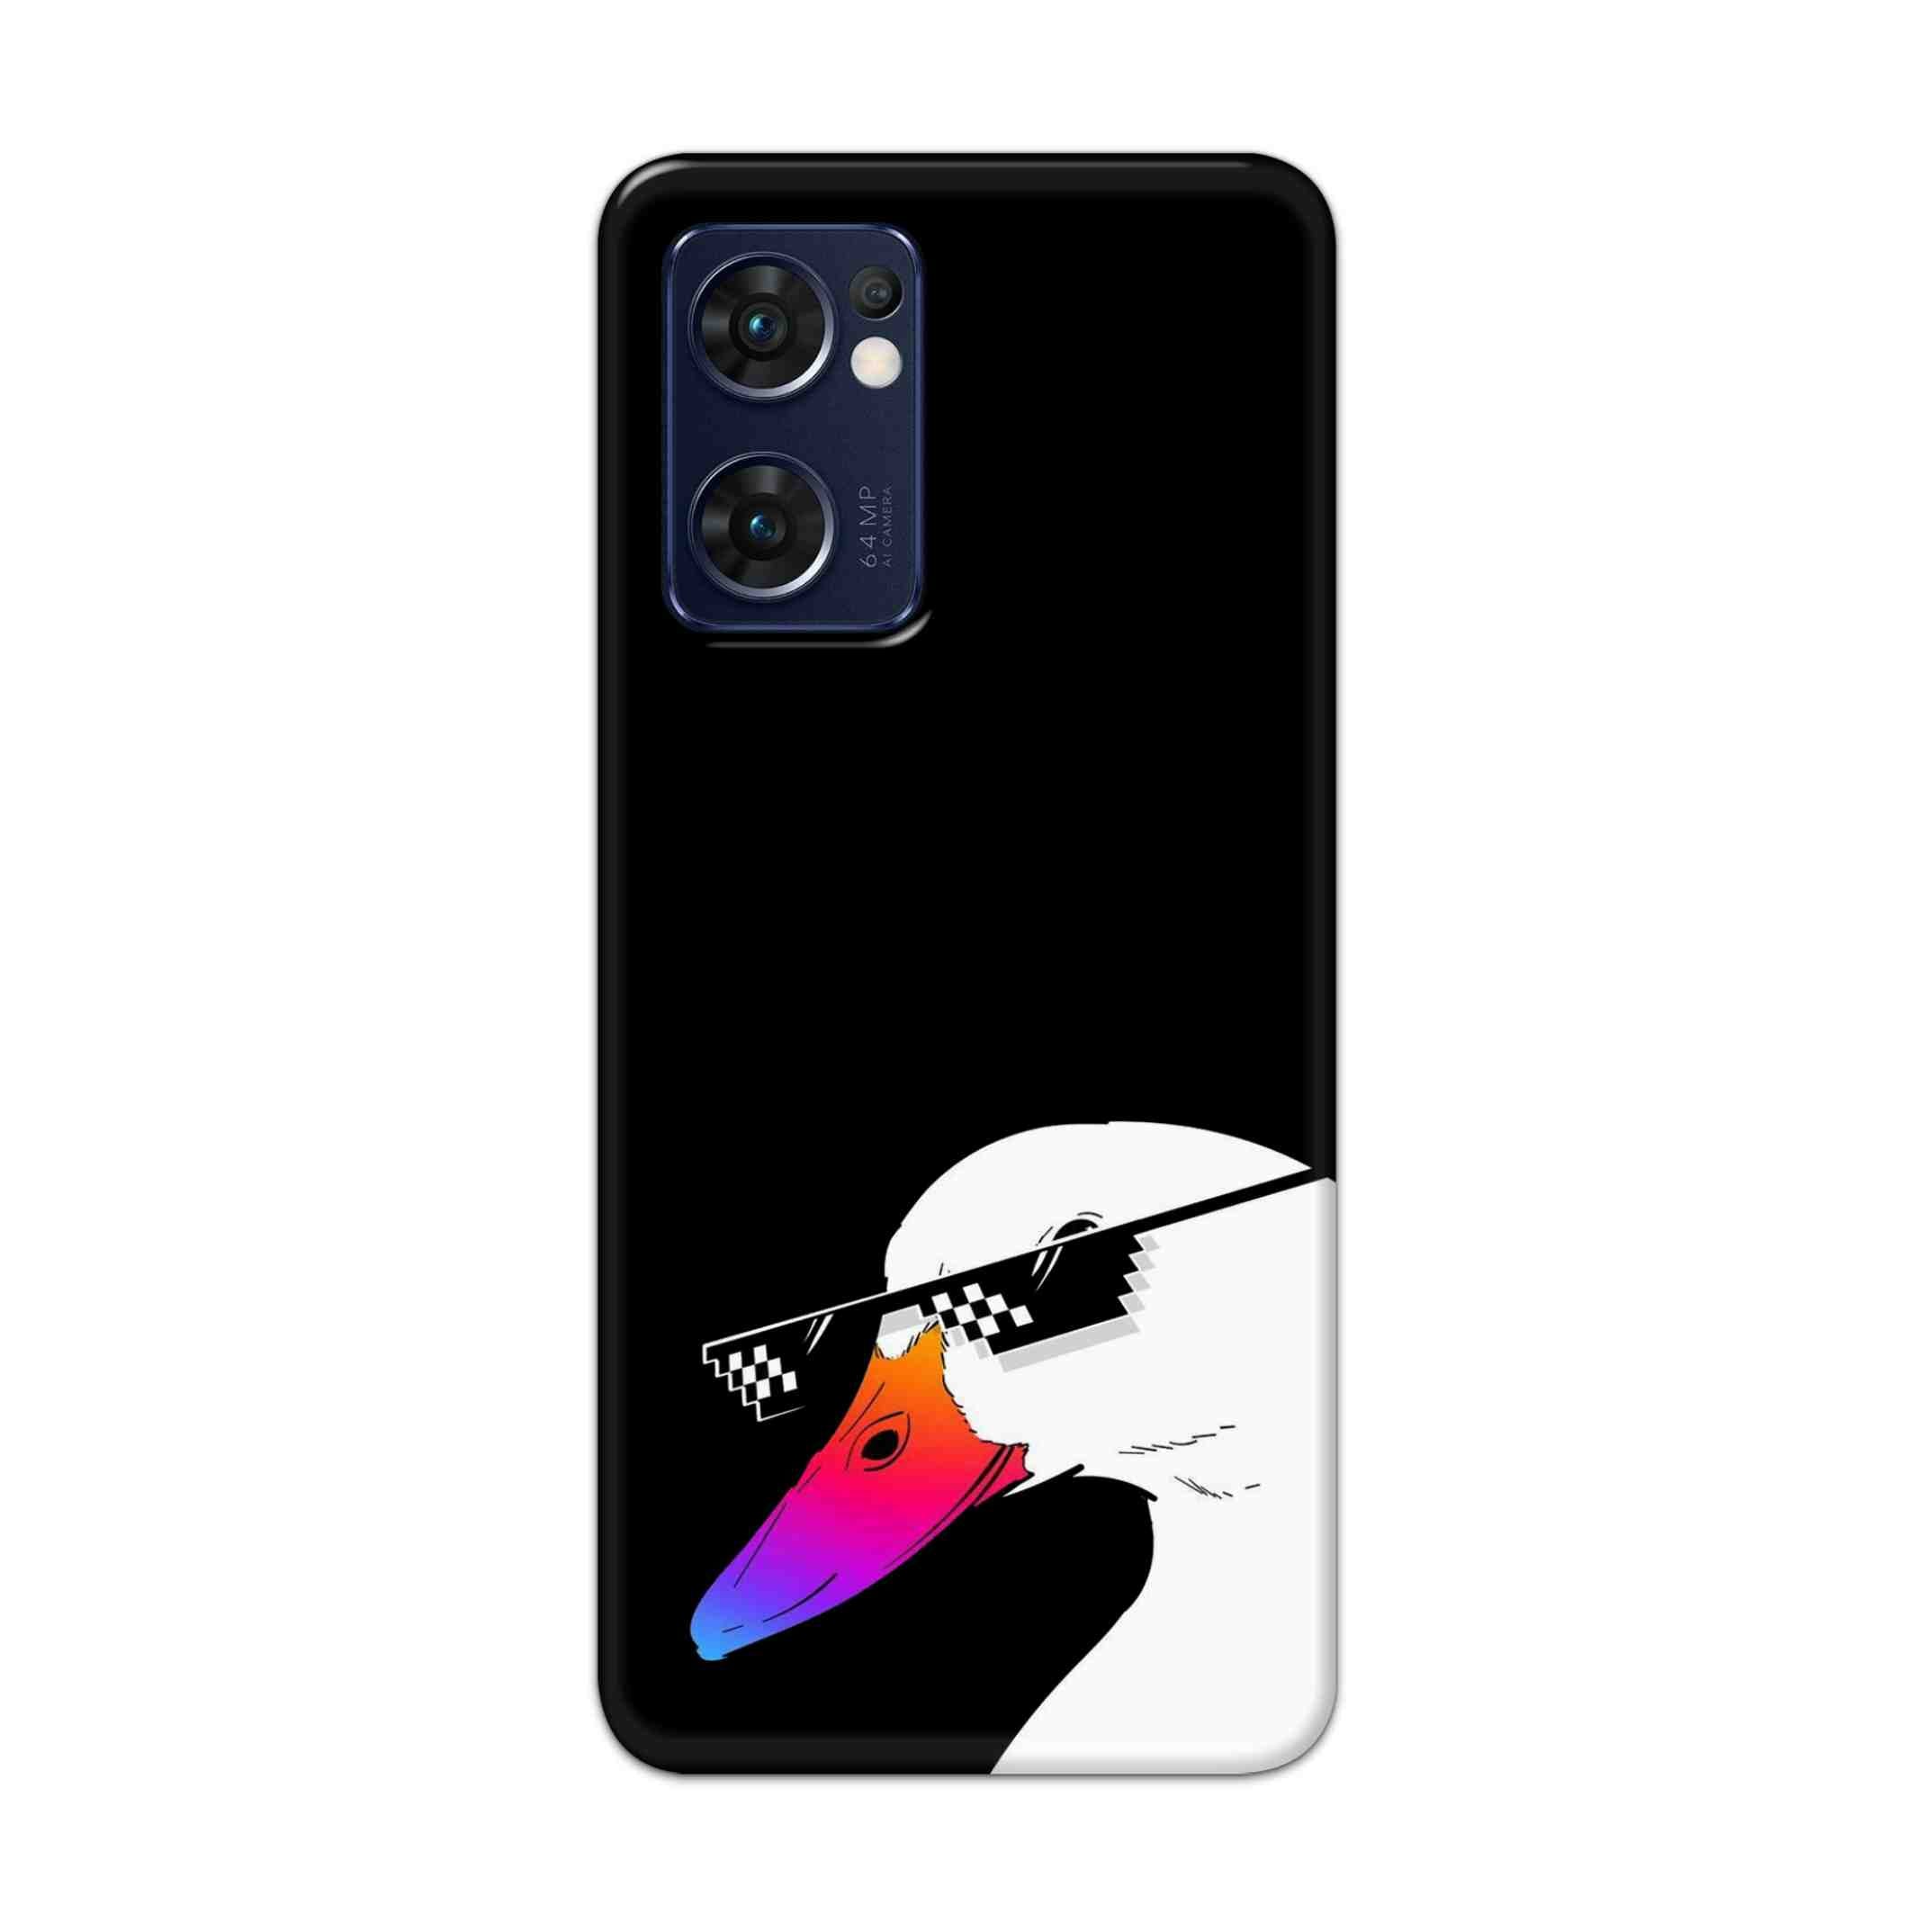 Buy Neon Duck Hard Back Mobile Phone Case Cover For Reno 7 5G Online